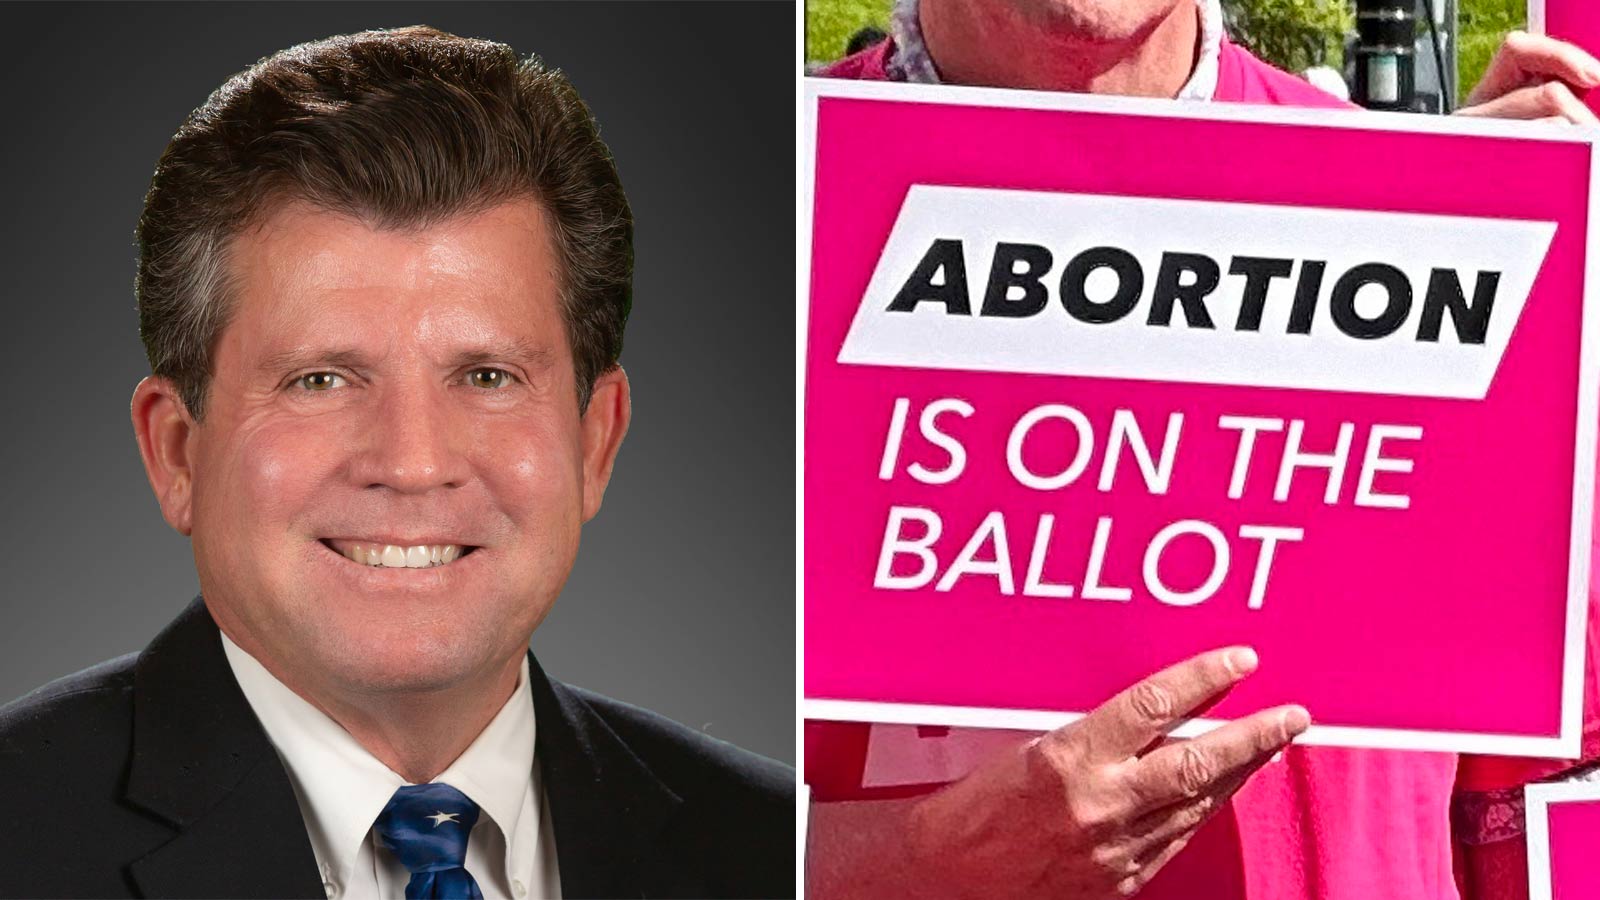 Split-panel image of Arizona Republican state Rep. Tim Dunn on the left and sign that says "Abortio...